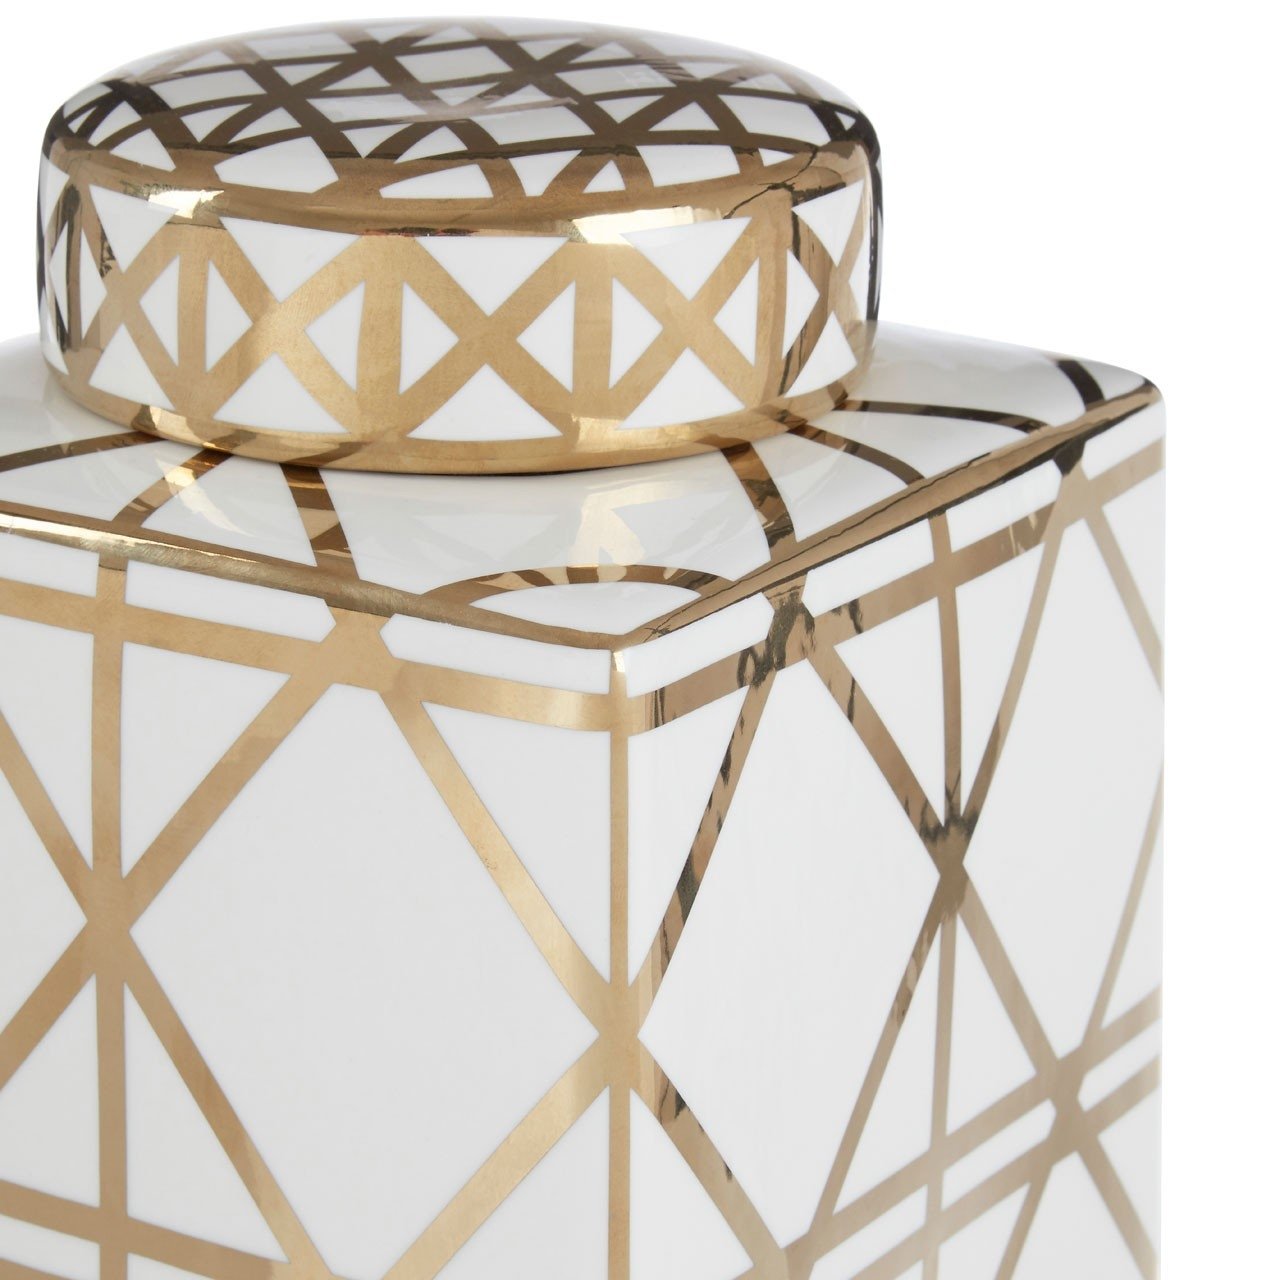 White and Gold Geometric Patterned Tea Jar